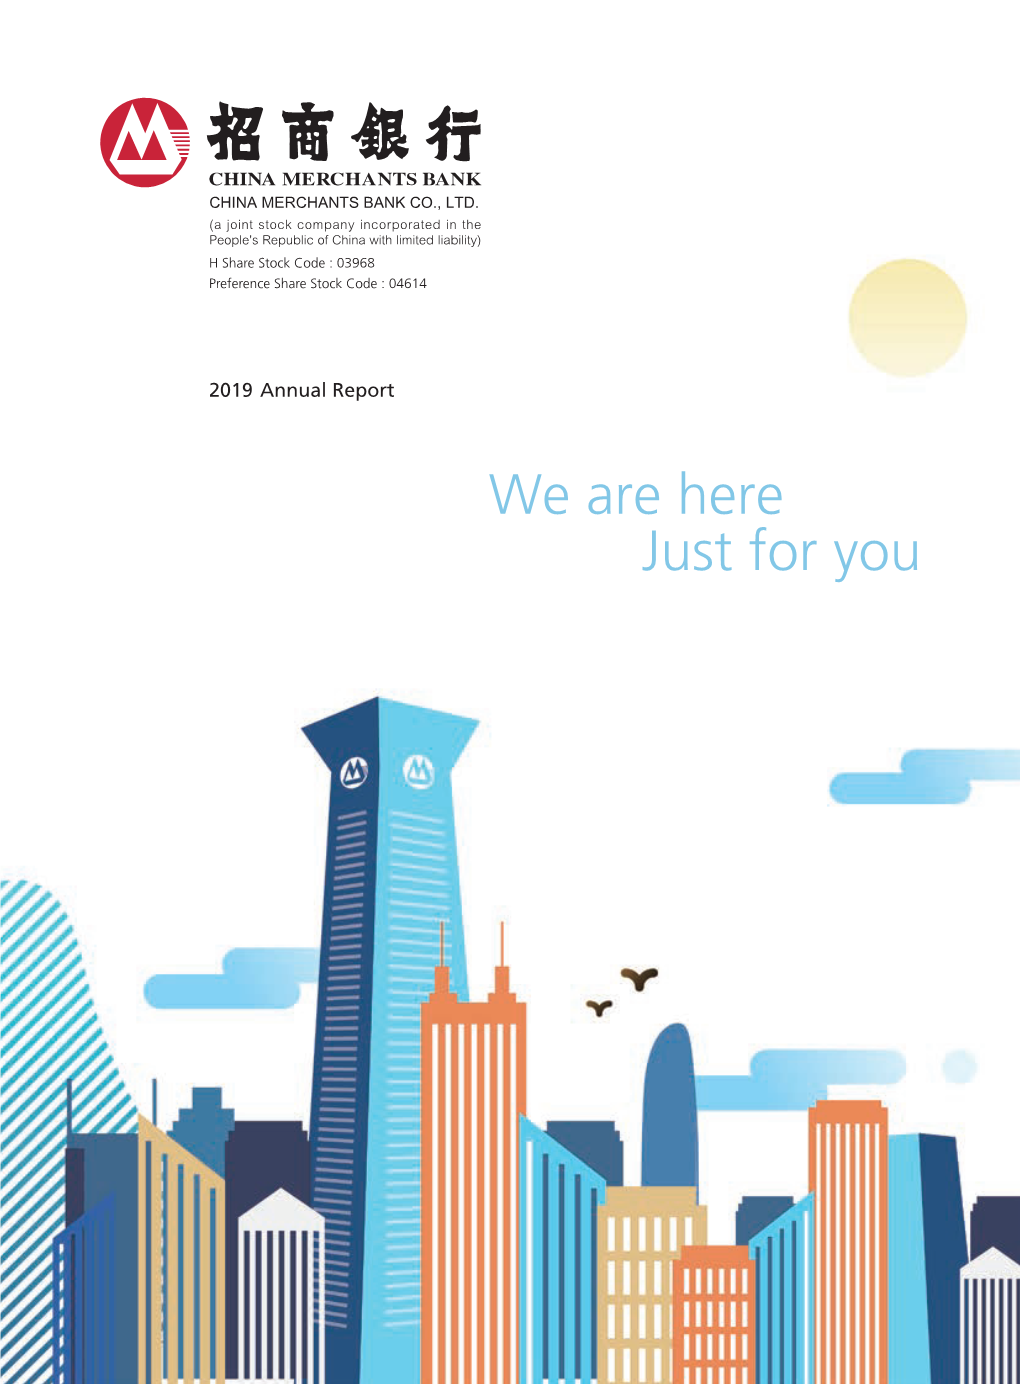 We Are Here Just for You Worldreginfo - D8f1f239-D947-4517-A288-7A14dd53af47 China Merchants Bank Contents 1 Annual Report 2019